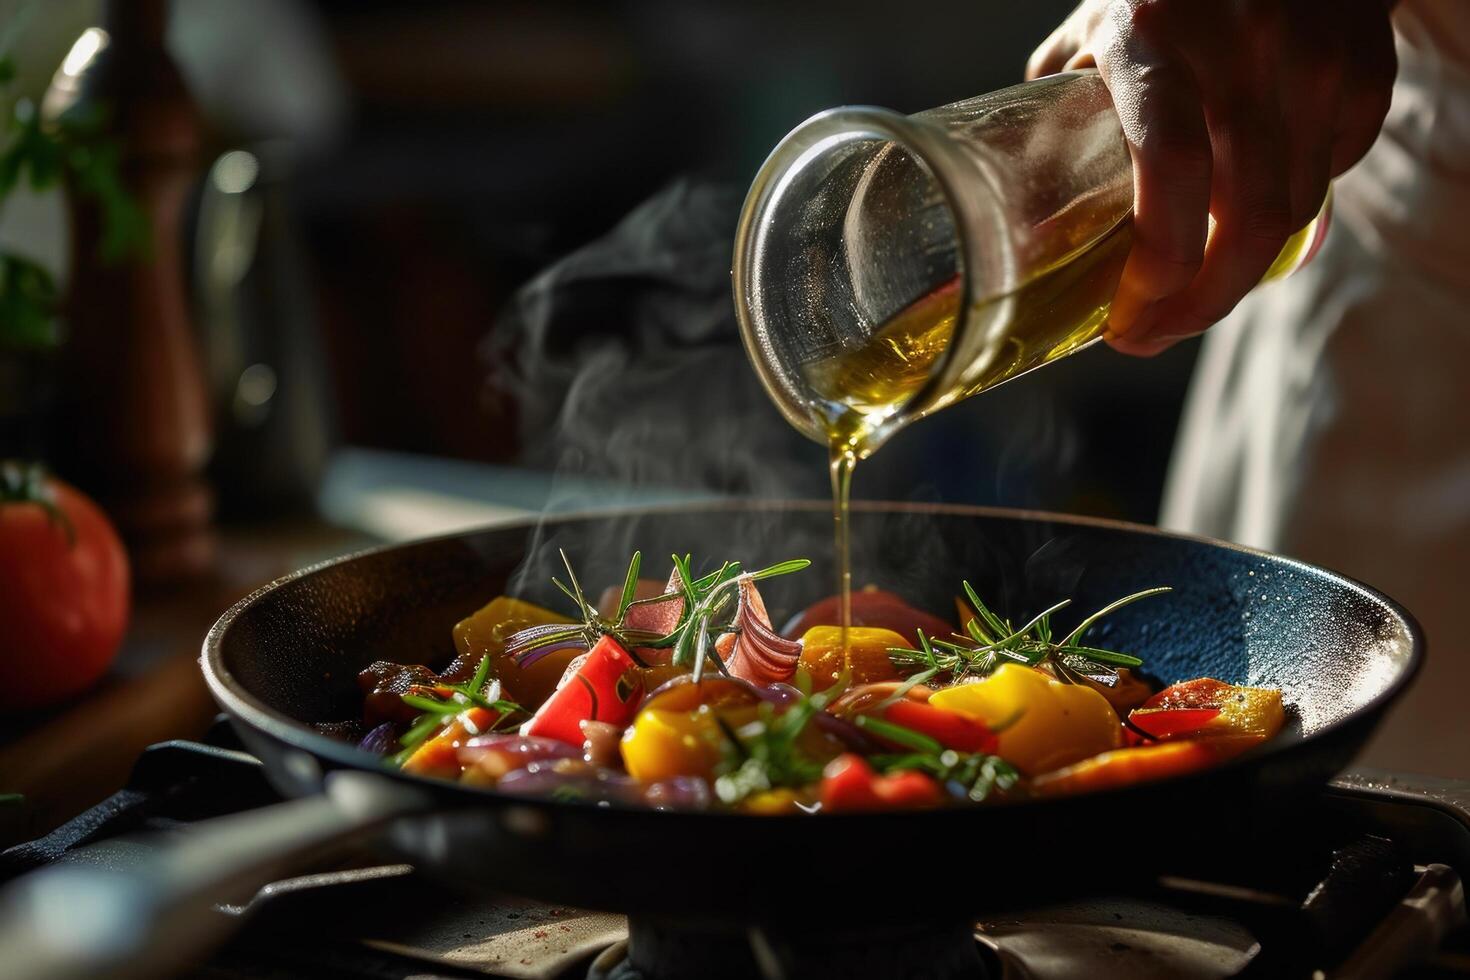 AI generated a person pouring oil into a skillet with vegetables and fruits photo